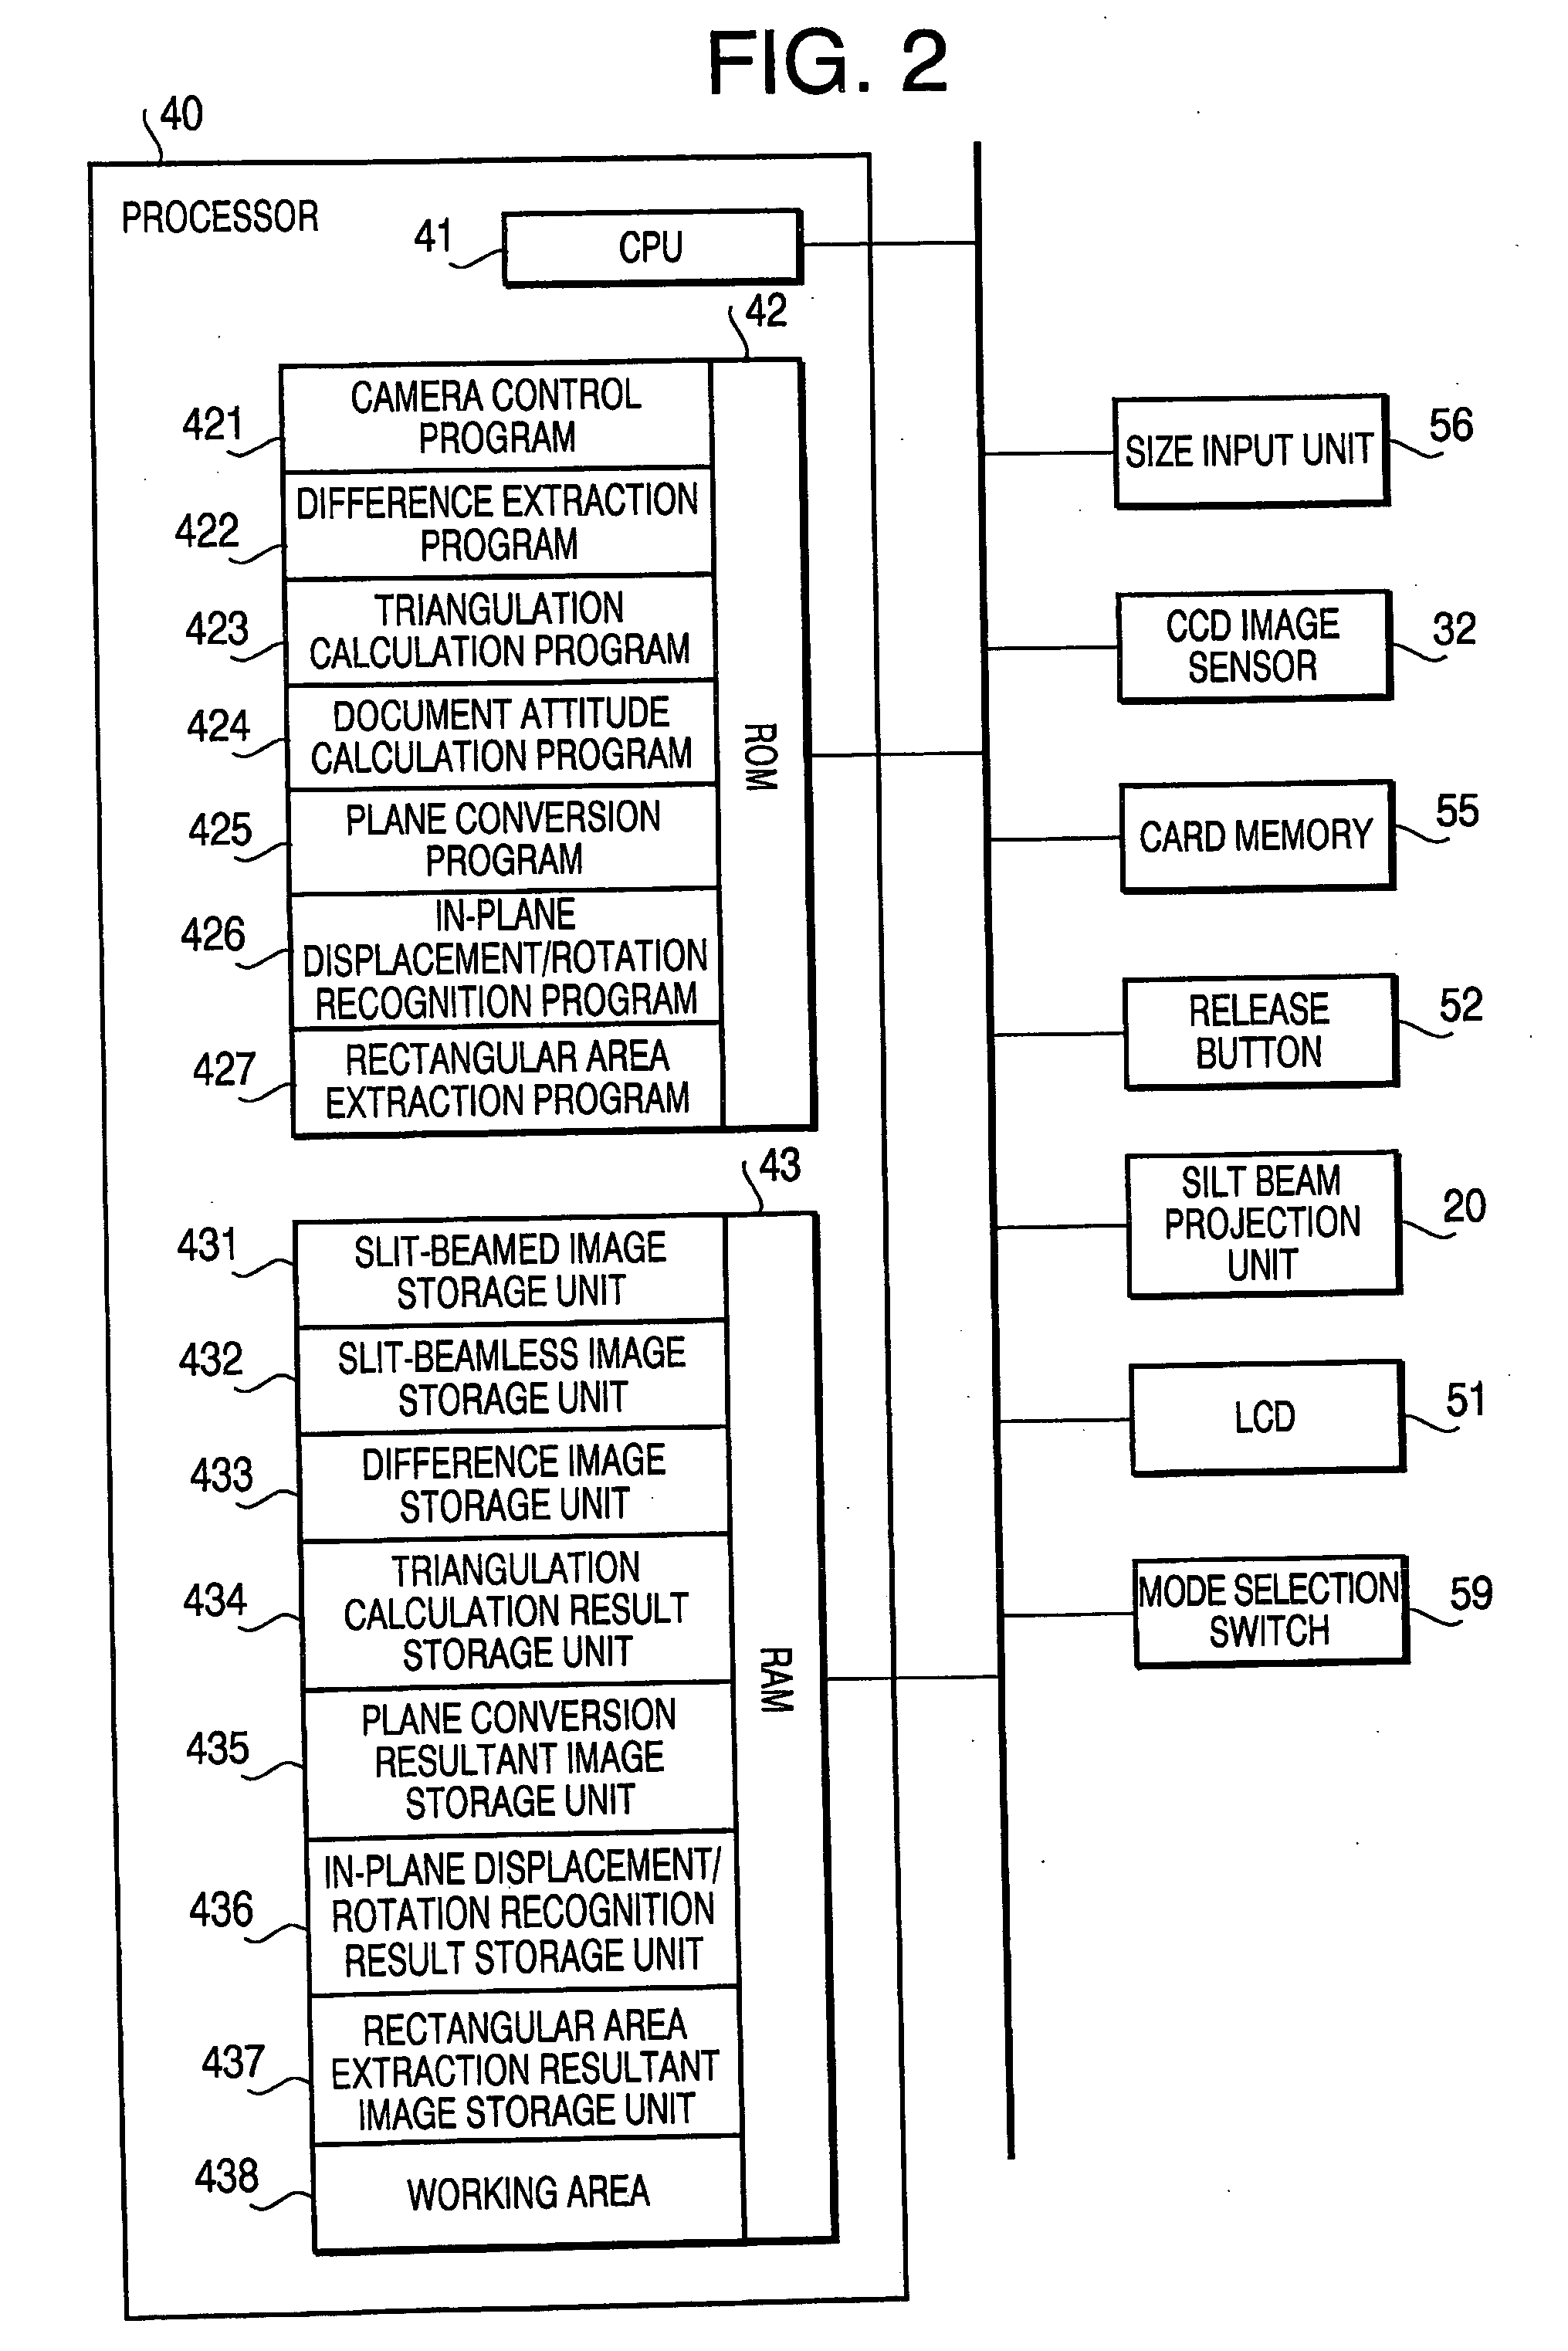 Image processing device and image capturing device